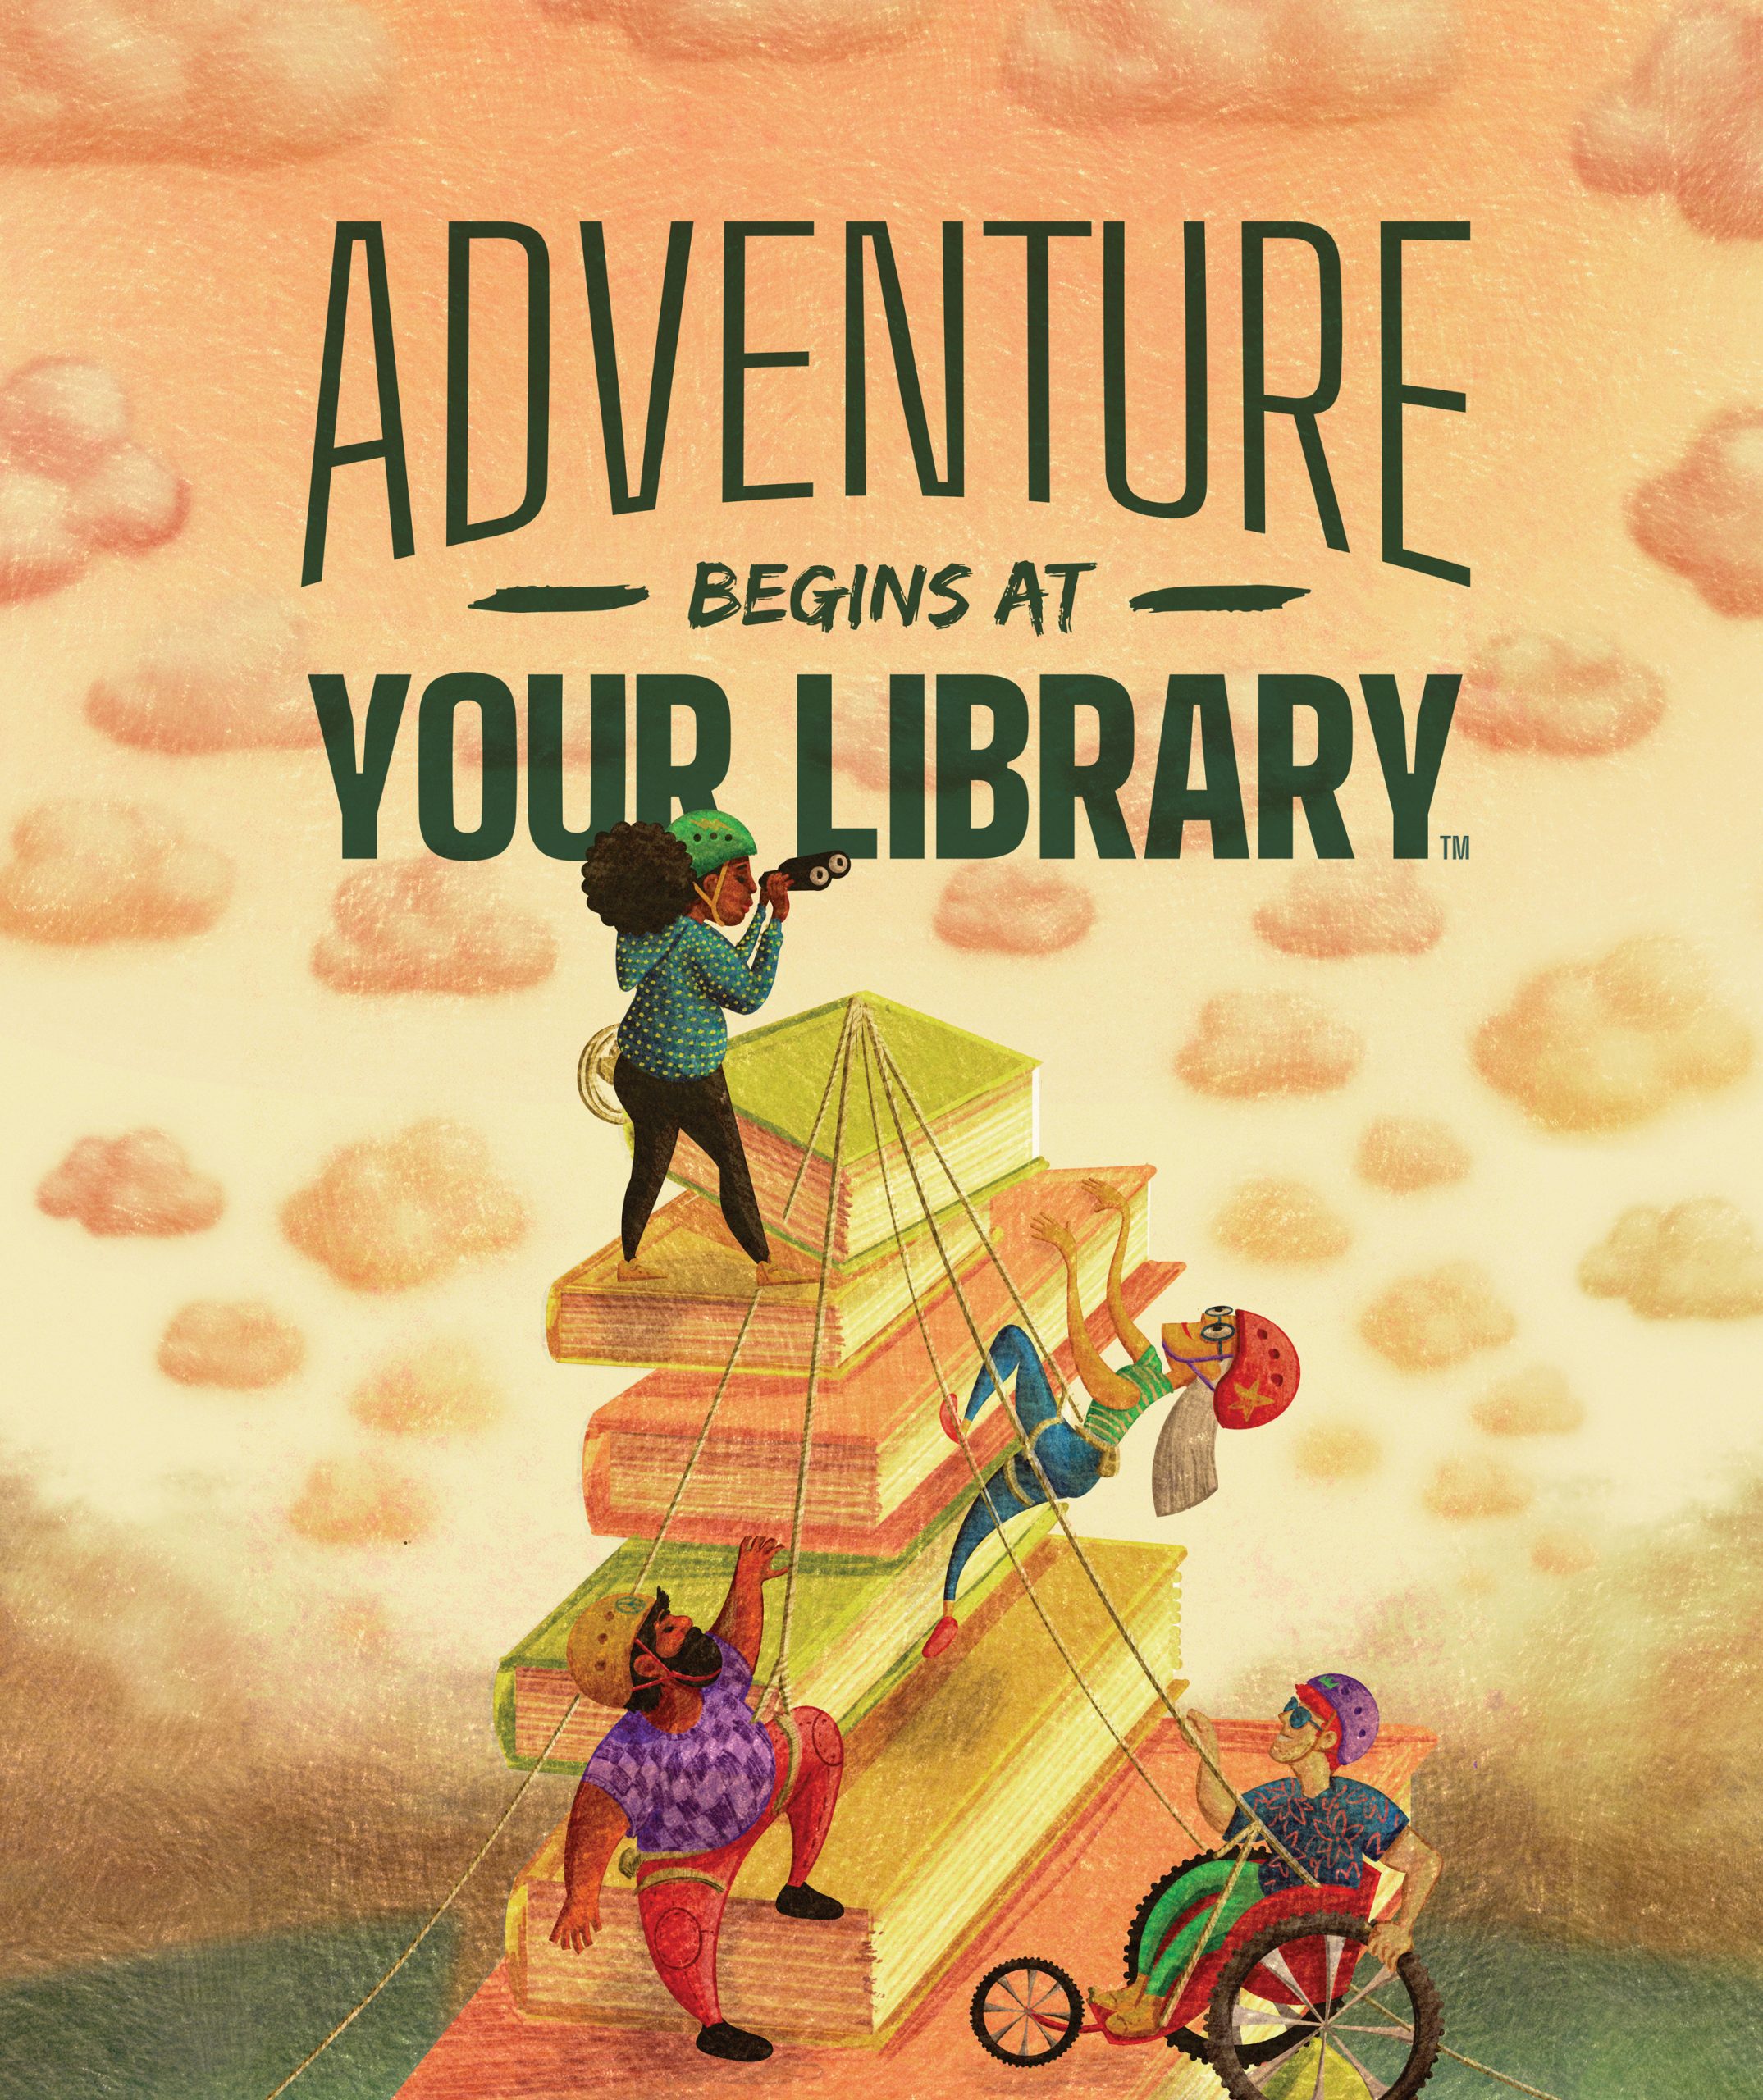 Adventure begins at your library when you climb your mountain of to be read books